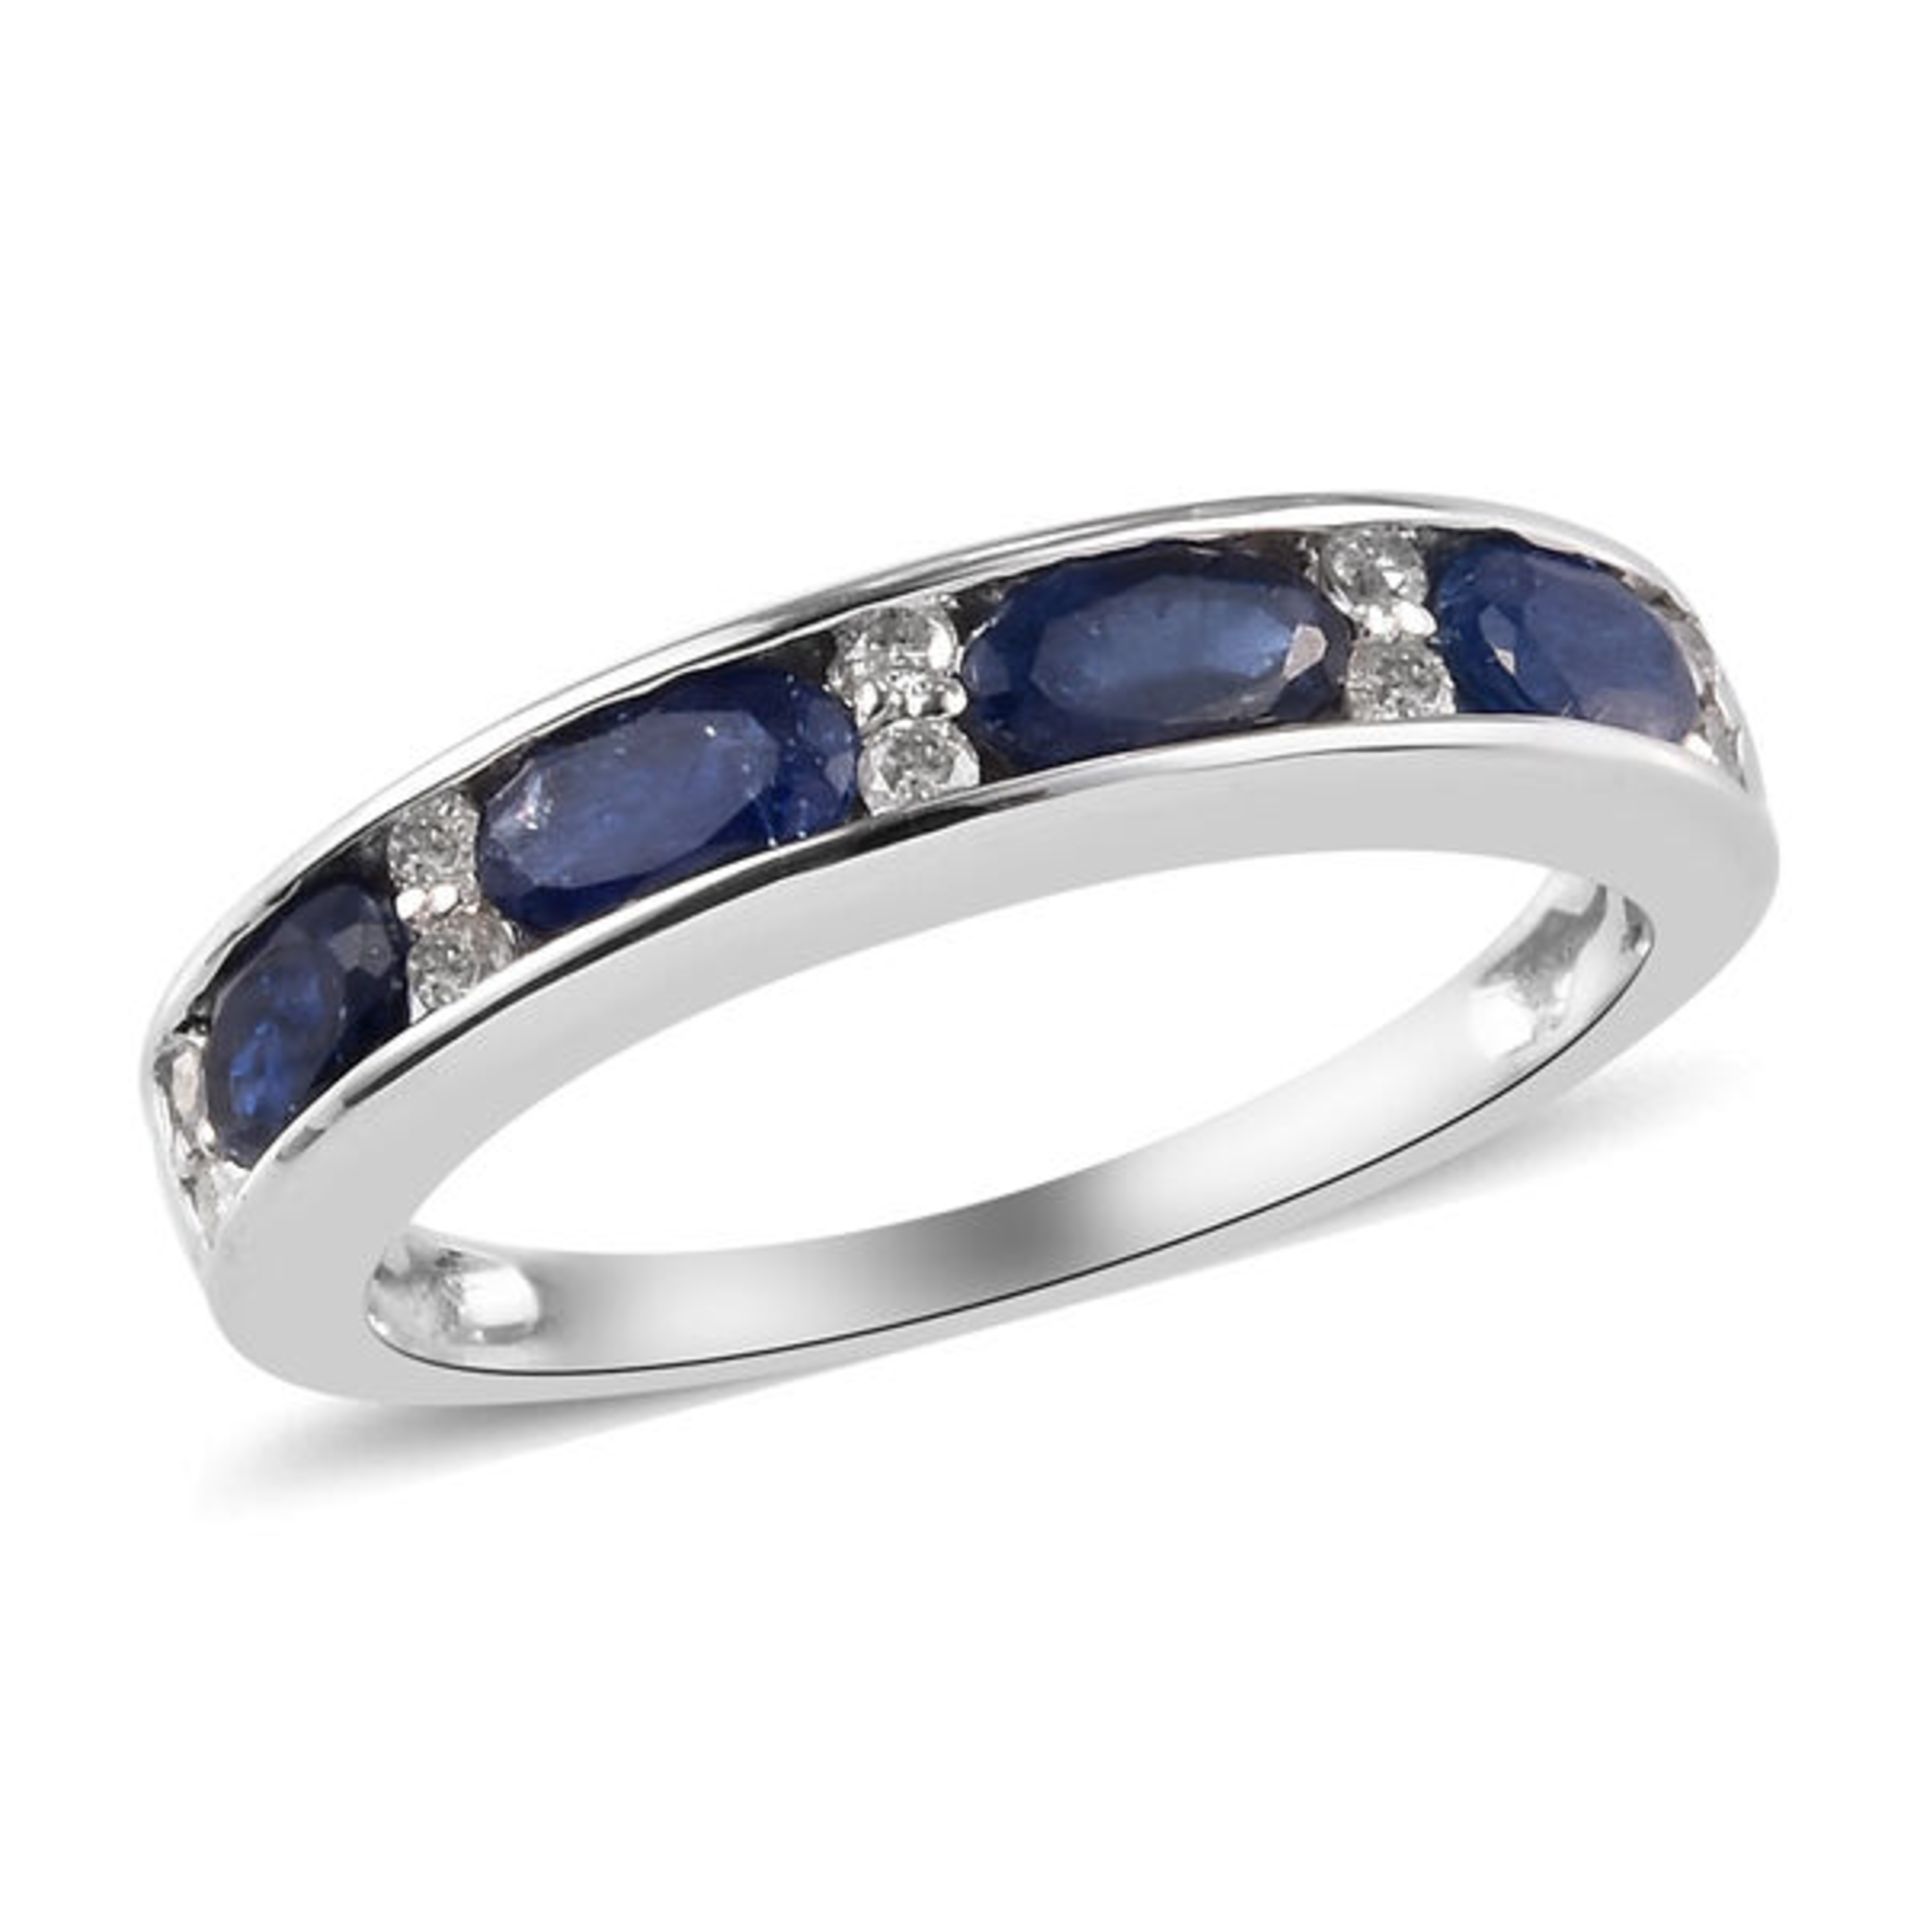 NEW!! 9K White Gold Natural Burmese Blue Sapphire and Diamond Band Ring - Image 4 of 4